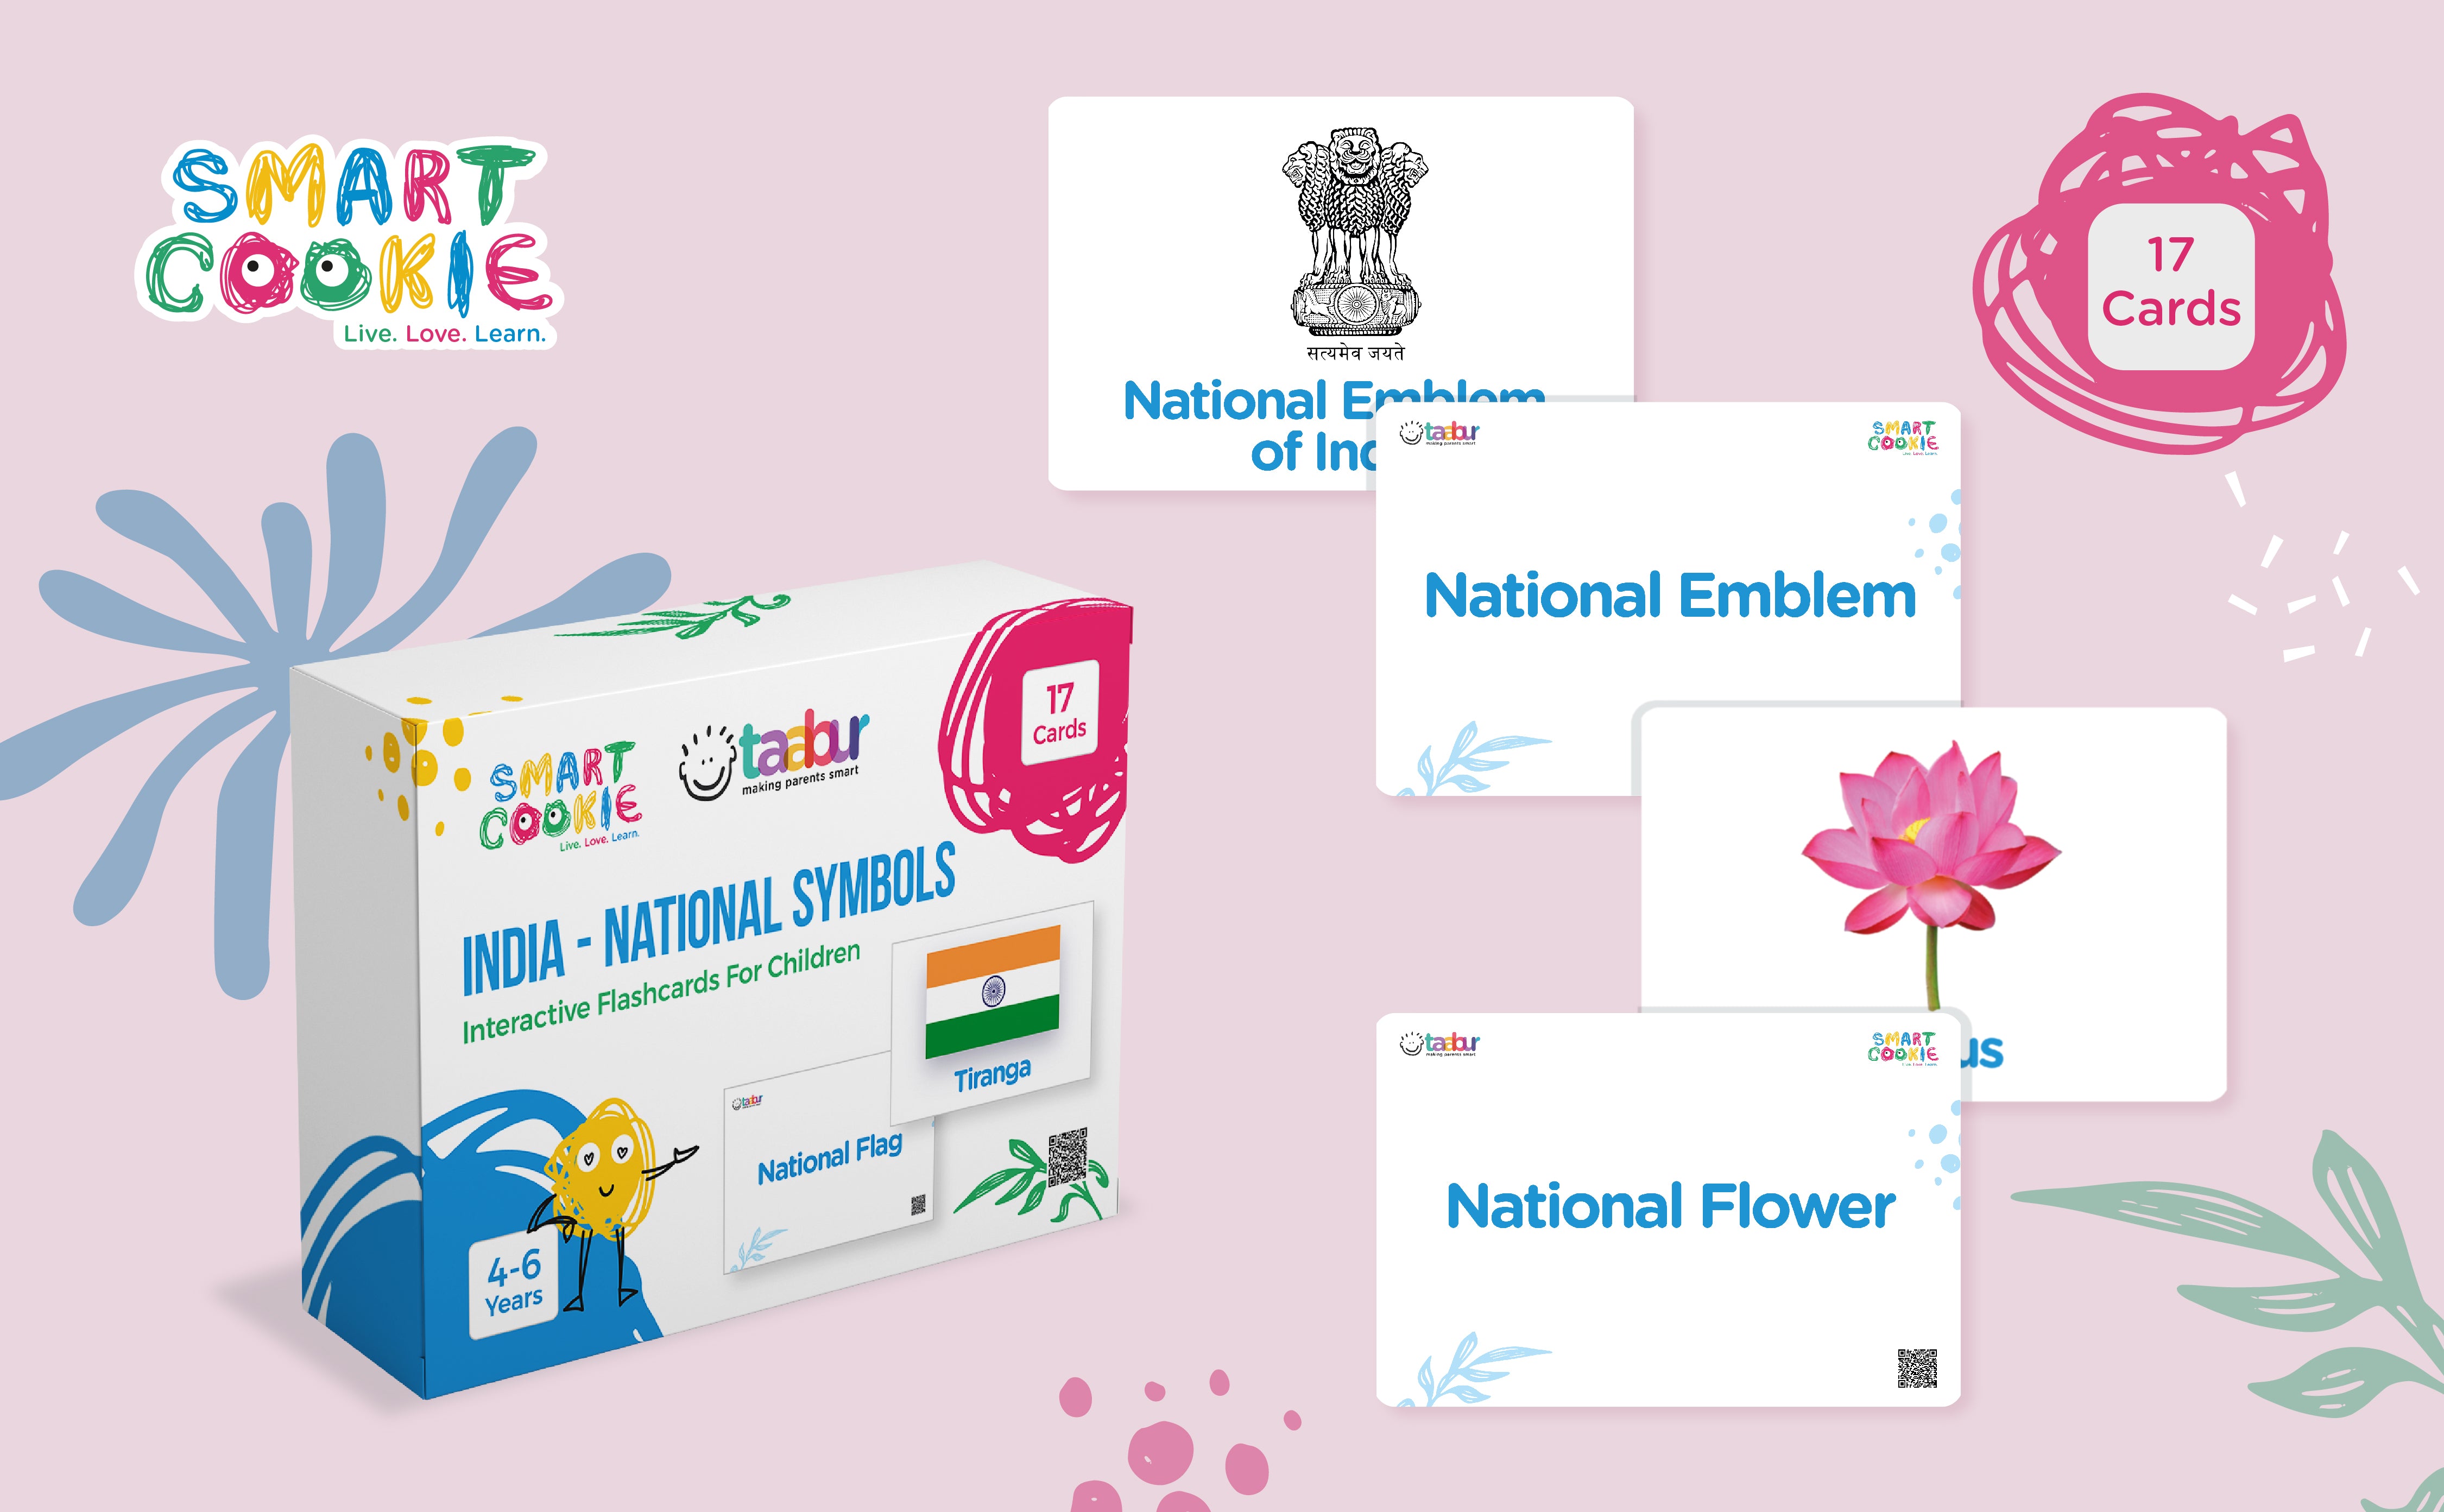 National Symbols - Interactive Flash Cards for Children (17 Cards) - for Kids Aged 4 to 6 Years Old